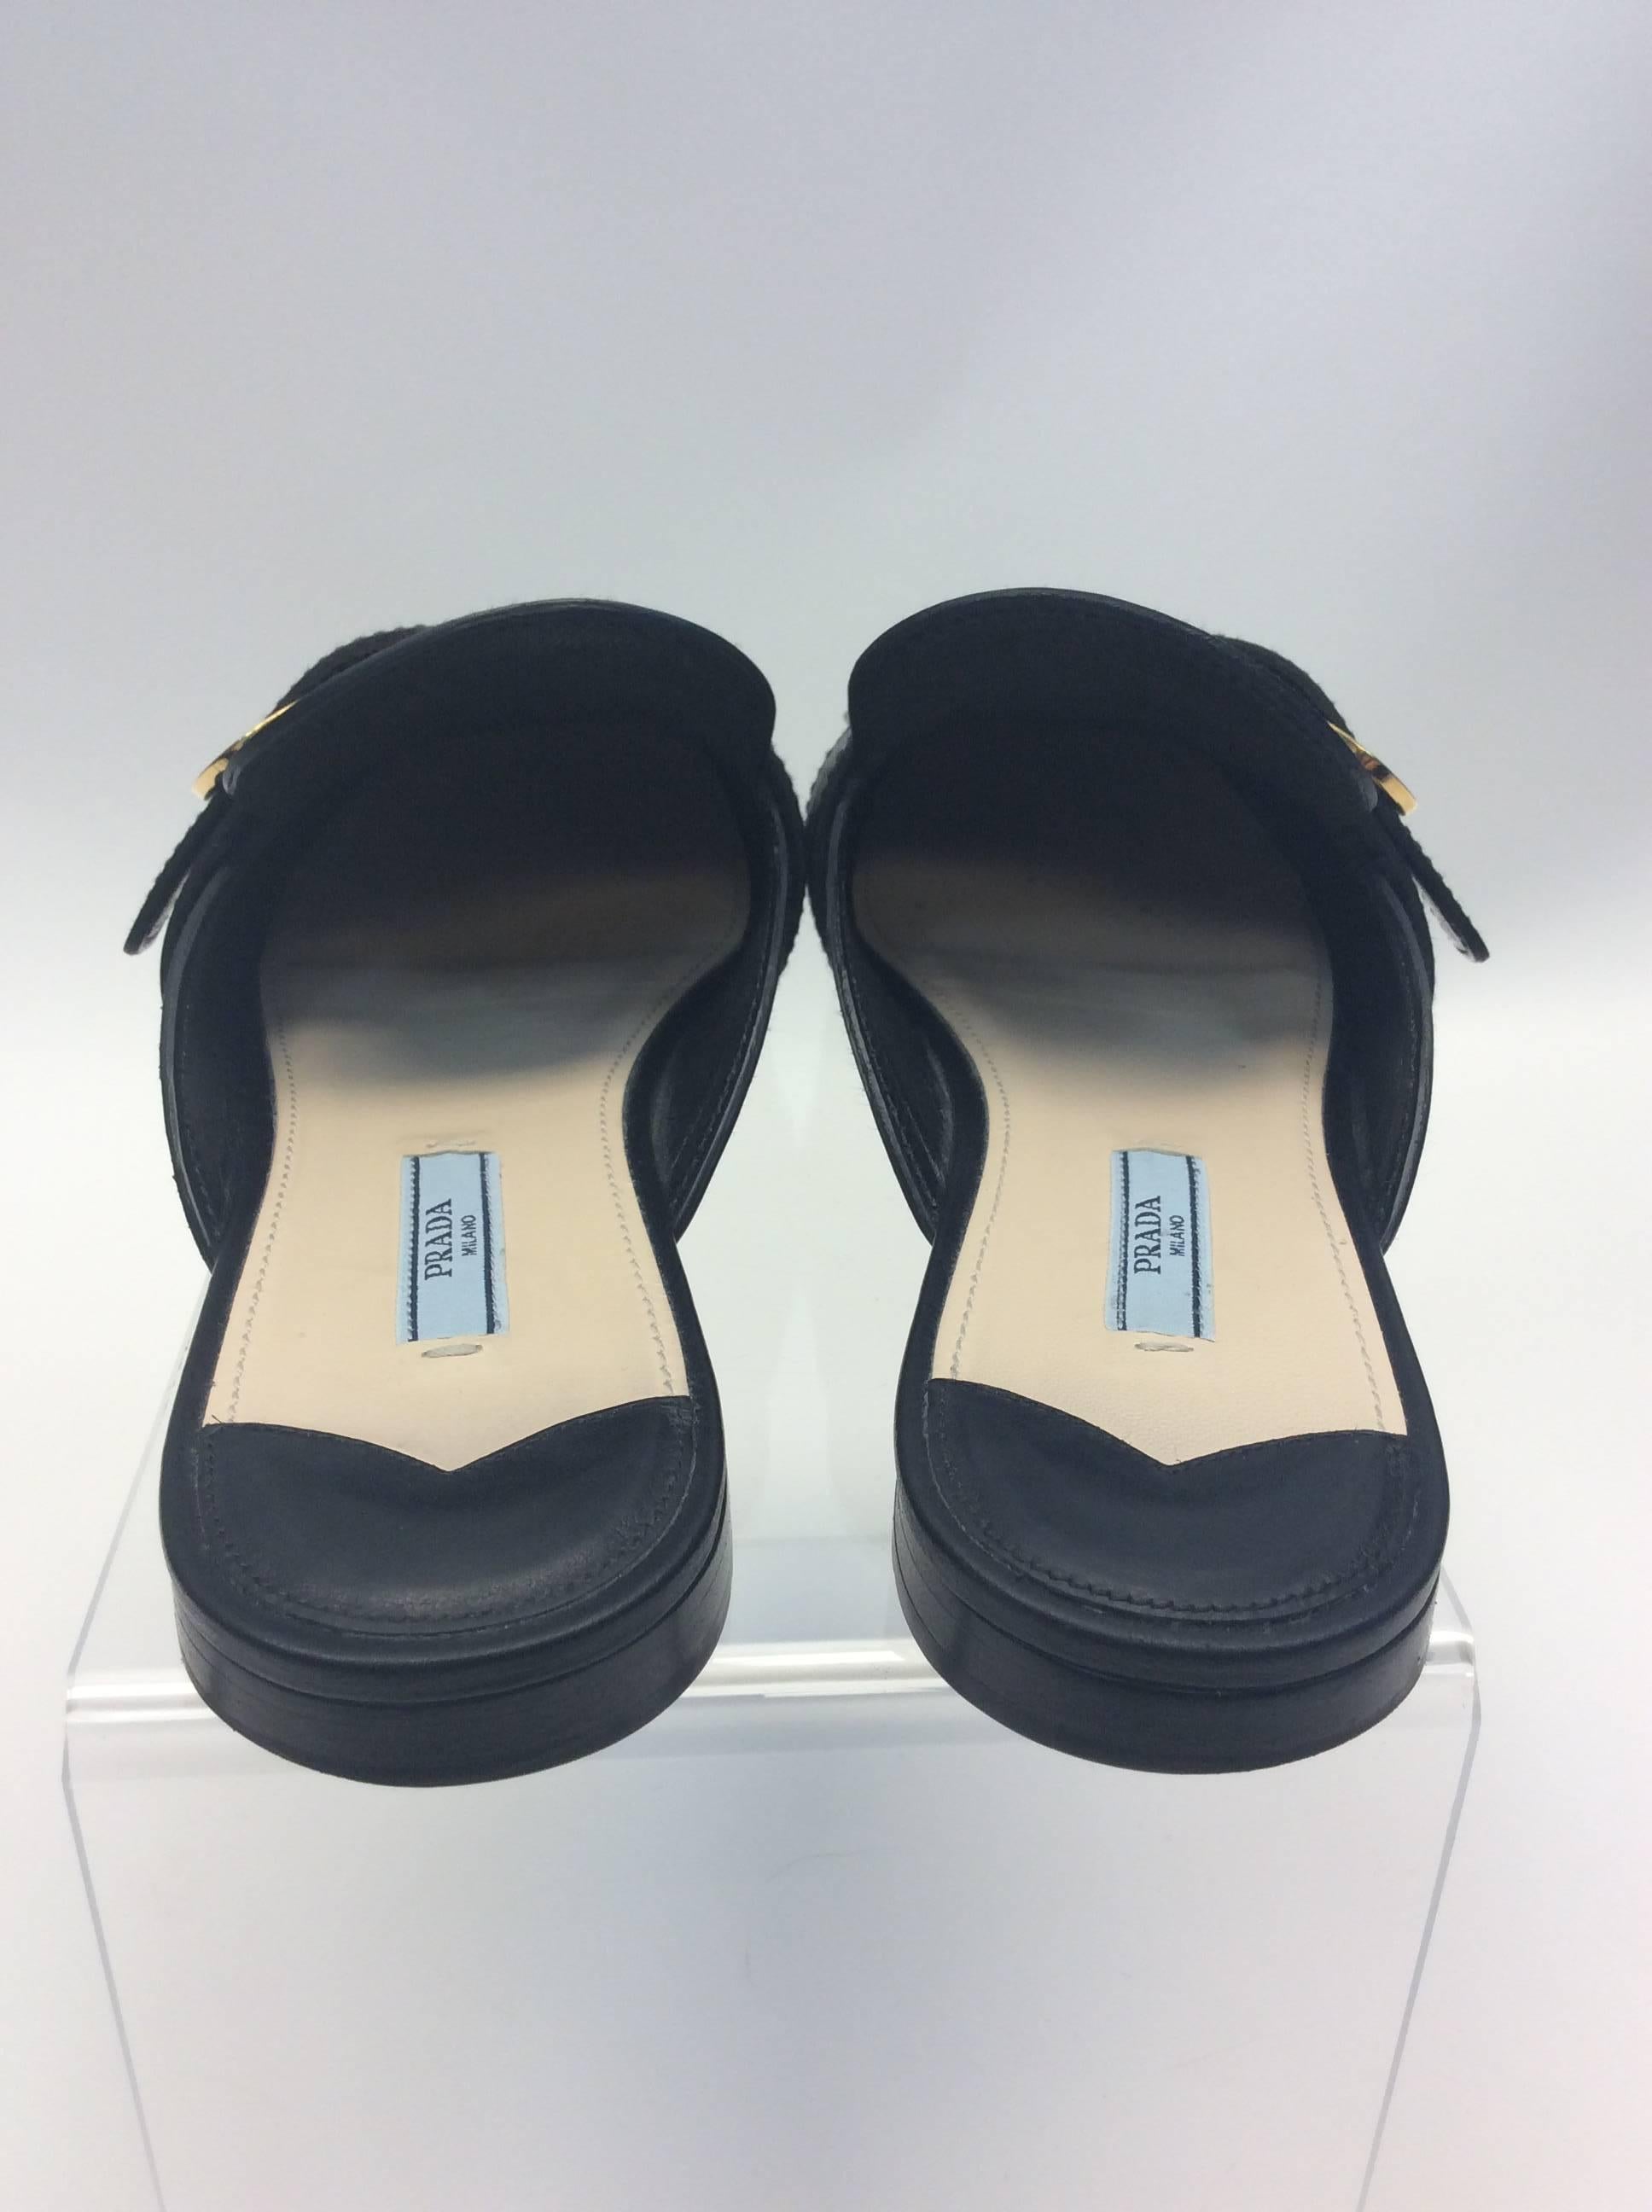 Prada Black Leather Fringe Slide with Buckle In Excellent Condition For Sale In Narberth, PA